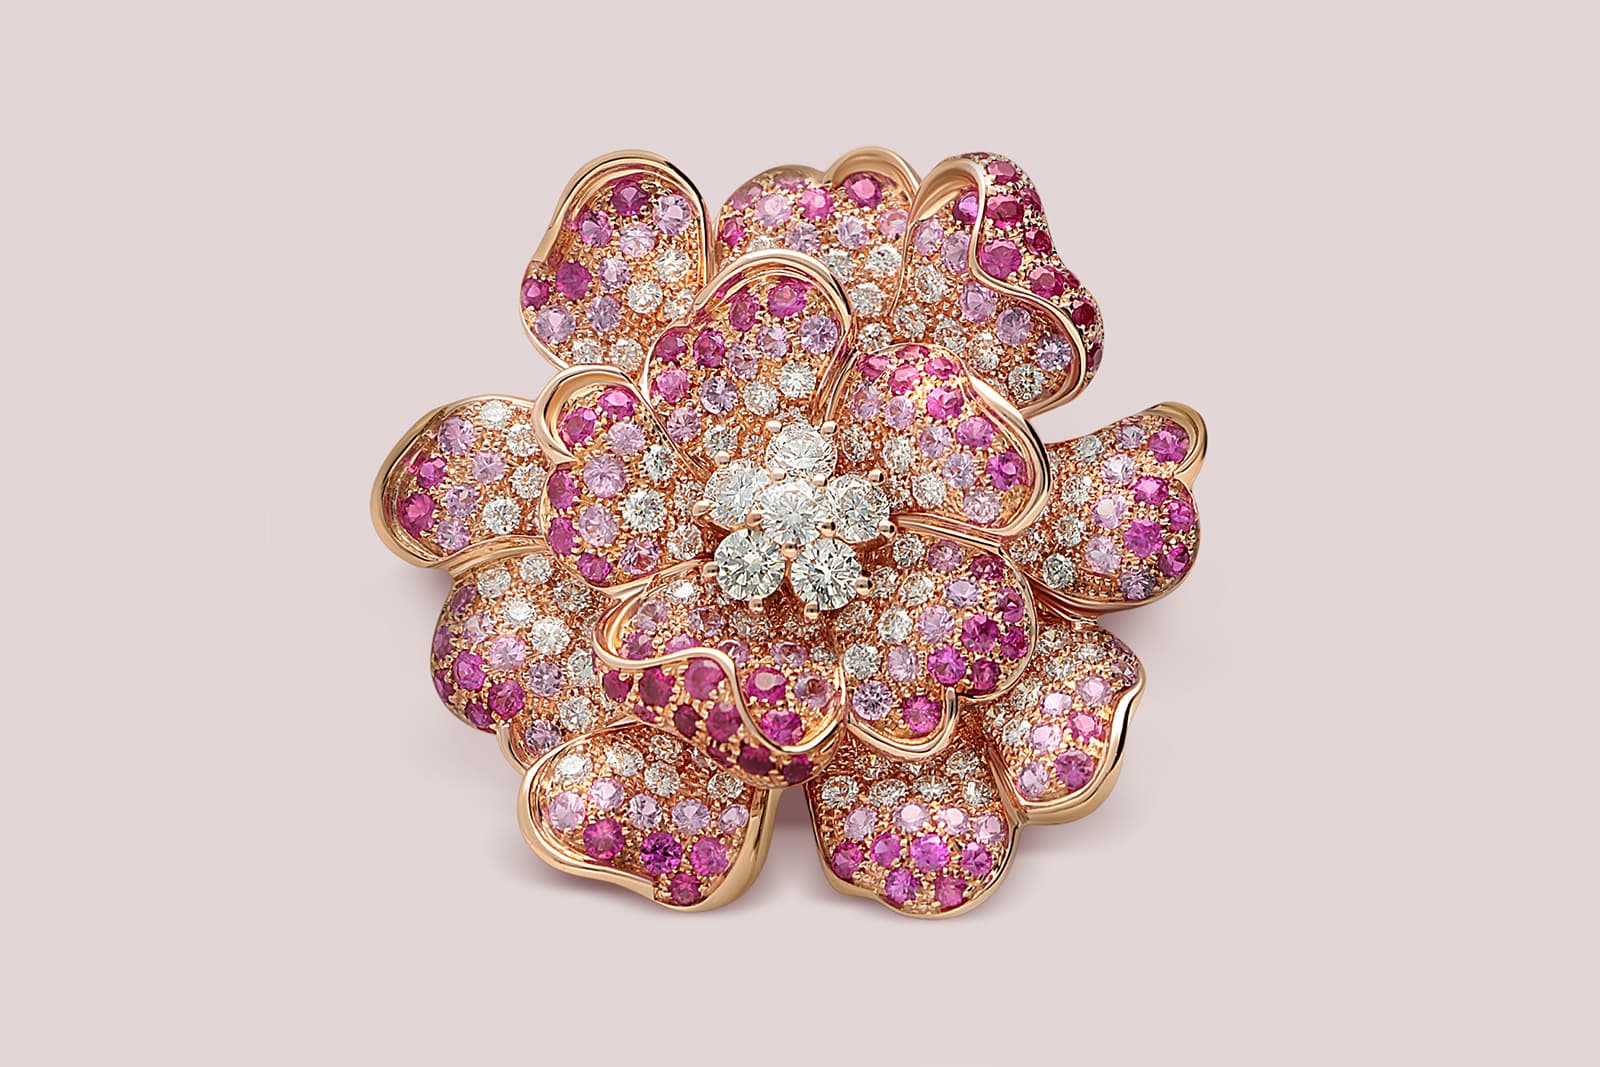 A flower creation with pink sapphires and diamonds by Leo Pizzo